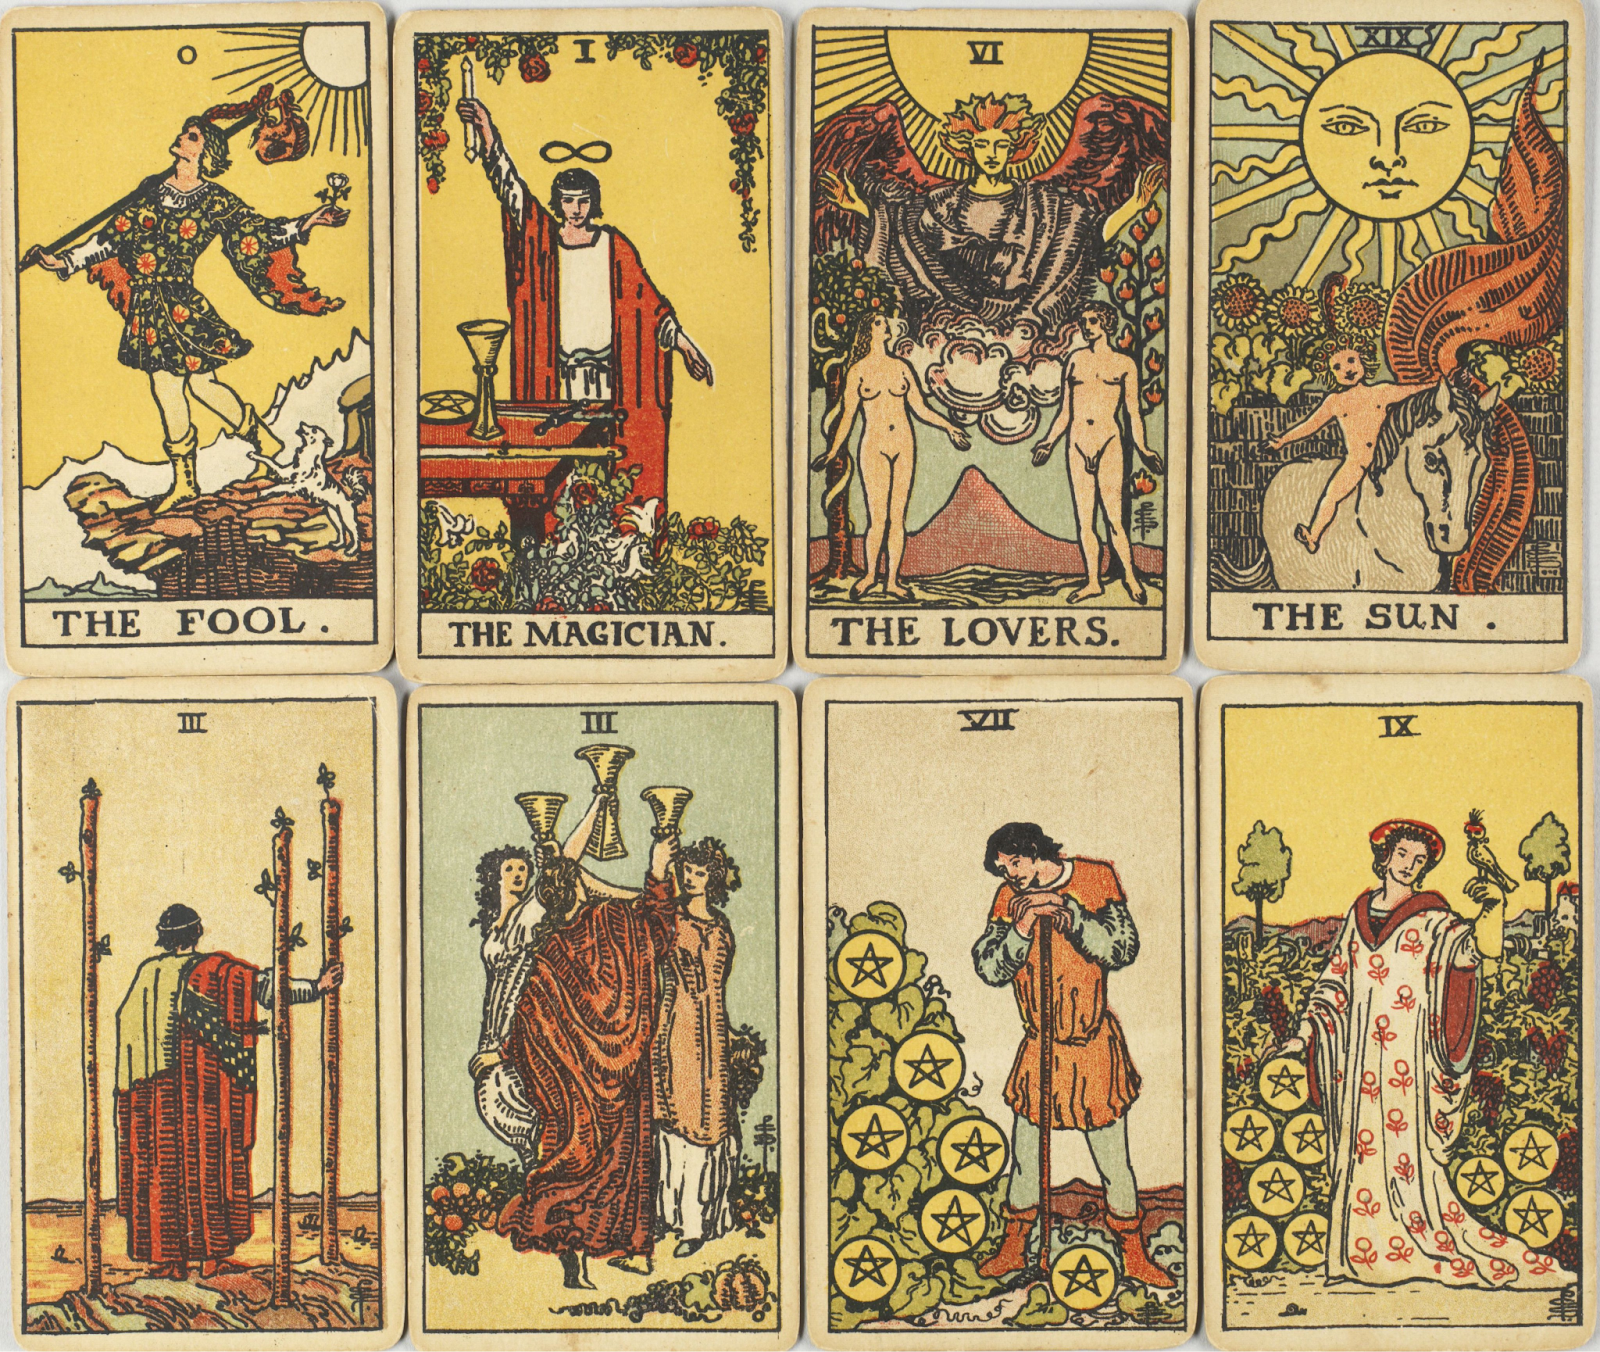 The collection comprises a total of eight cards hailing from the Rider-Waite-Smith deck, which was printed during the period spanning from 1920 to 1930. 